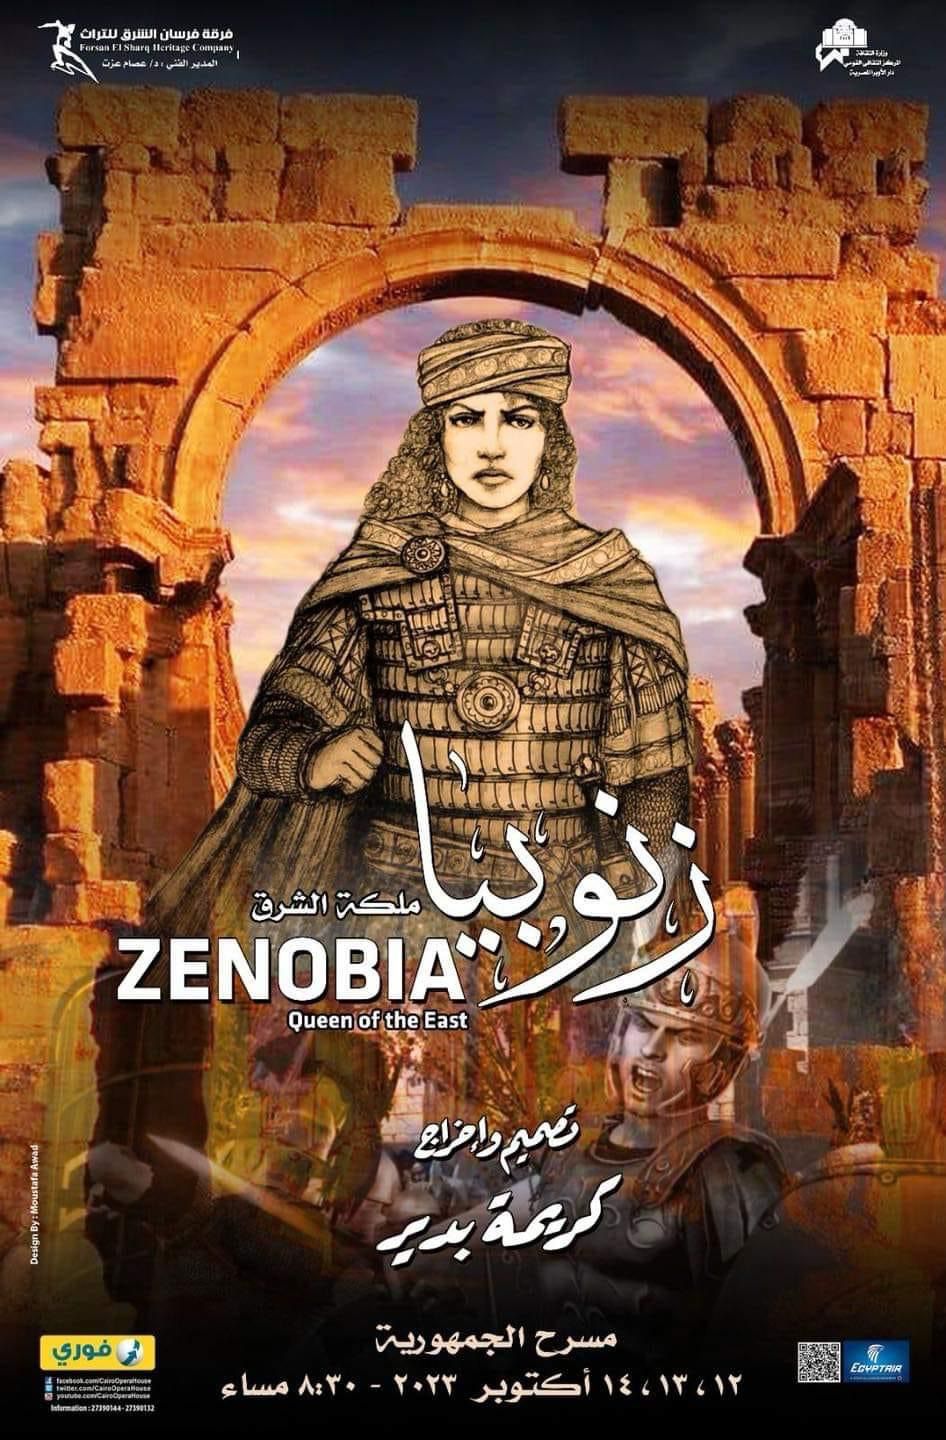 “Zenobia, Queen of the East” Latest Production of Forsan Al-Sharq Heritage Company